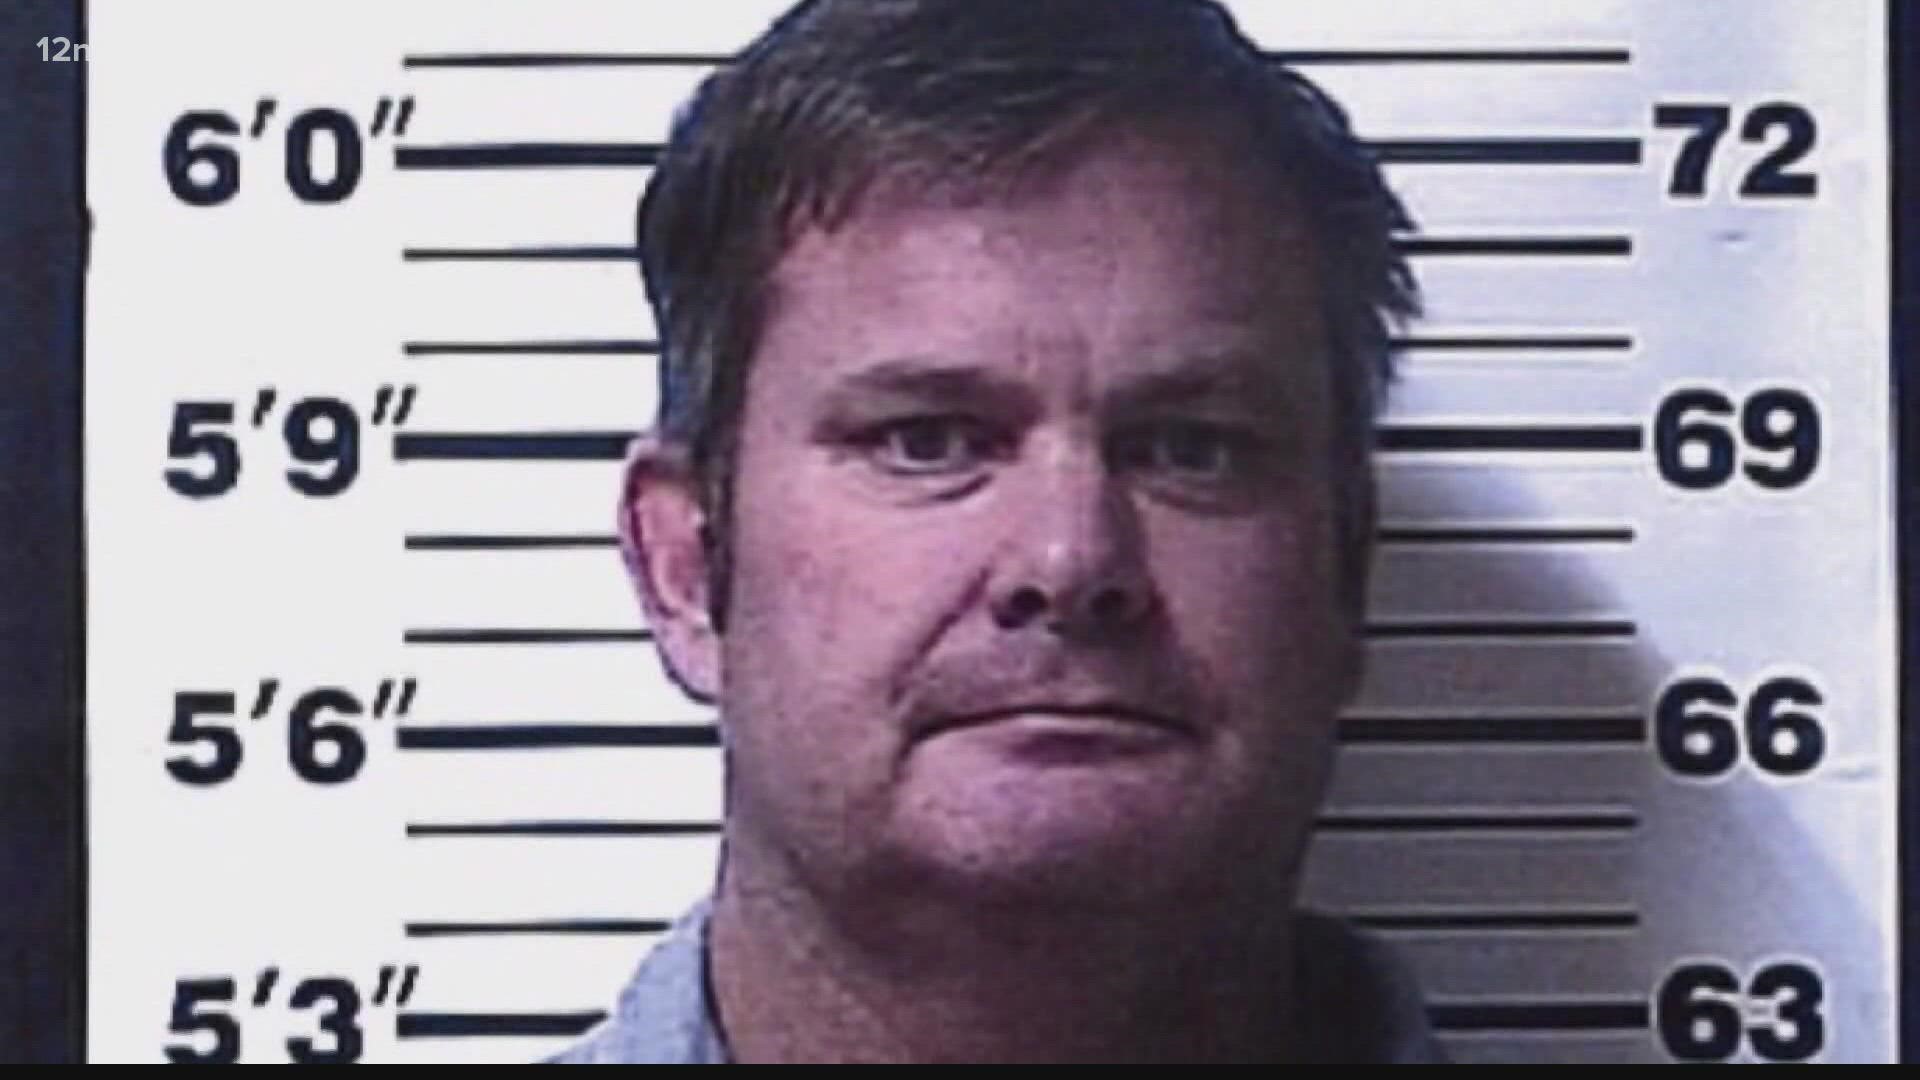 Prior has been representing Chad Daybell in the current murder case since May 2021. He also represented Daybell in a previous, related case since 2020.